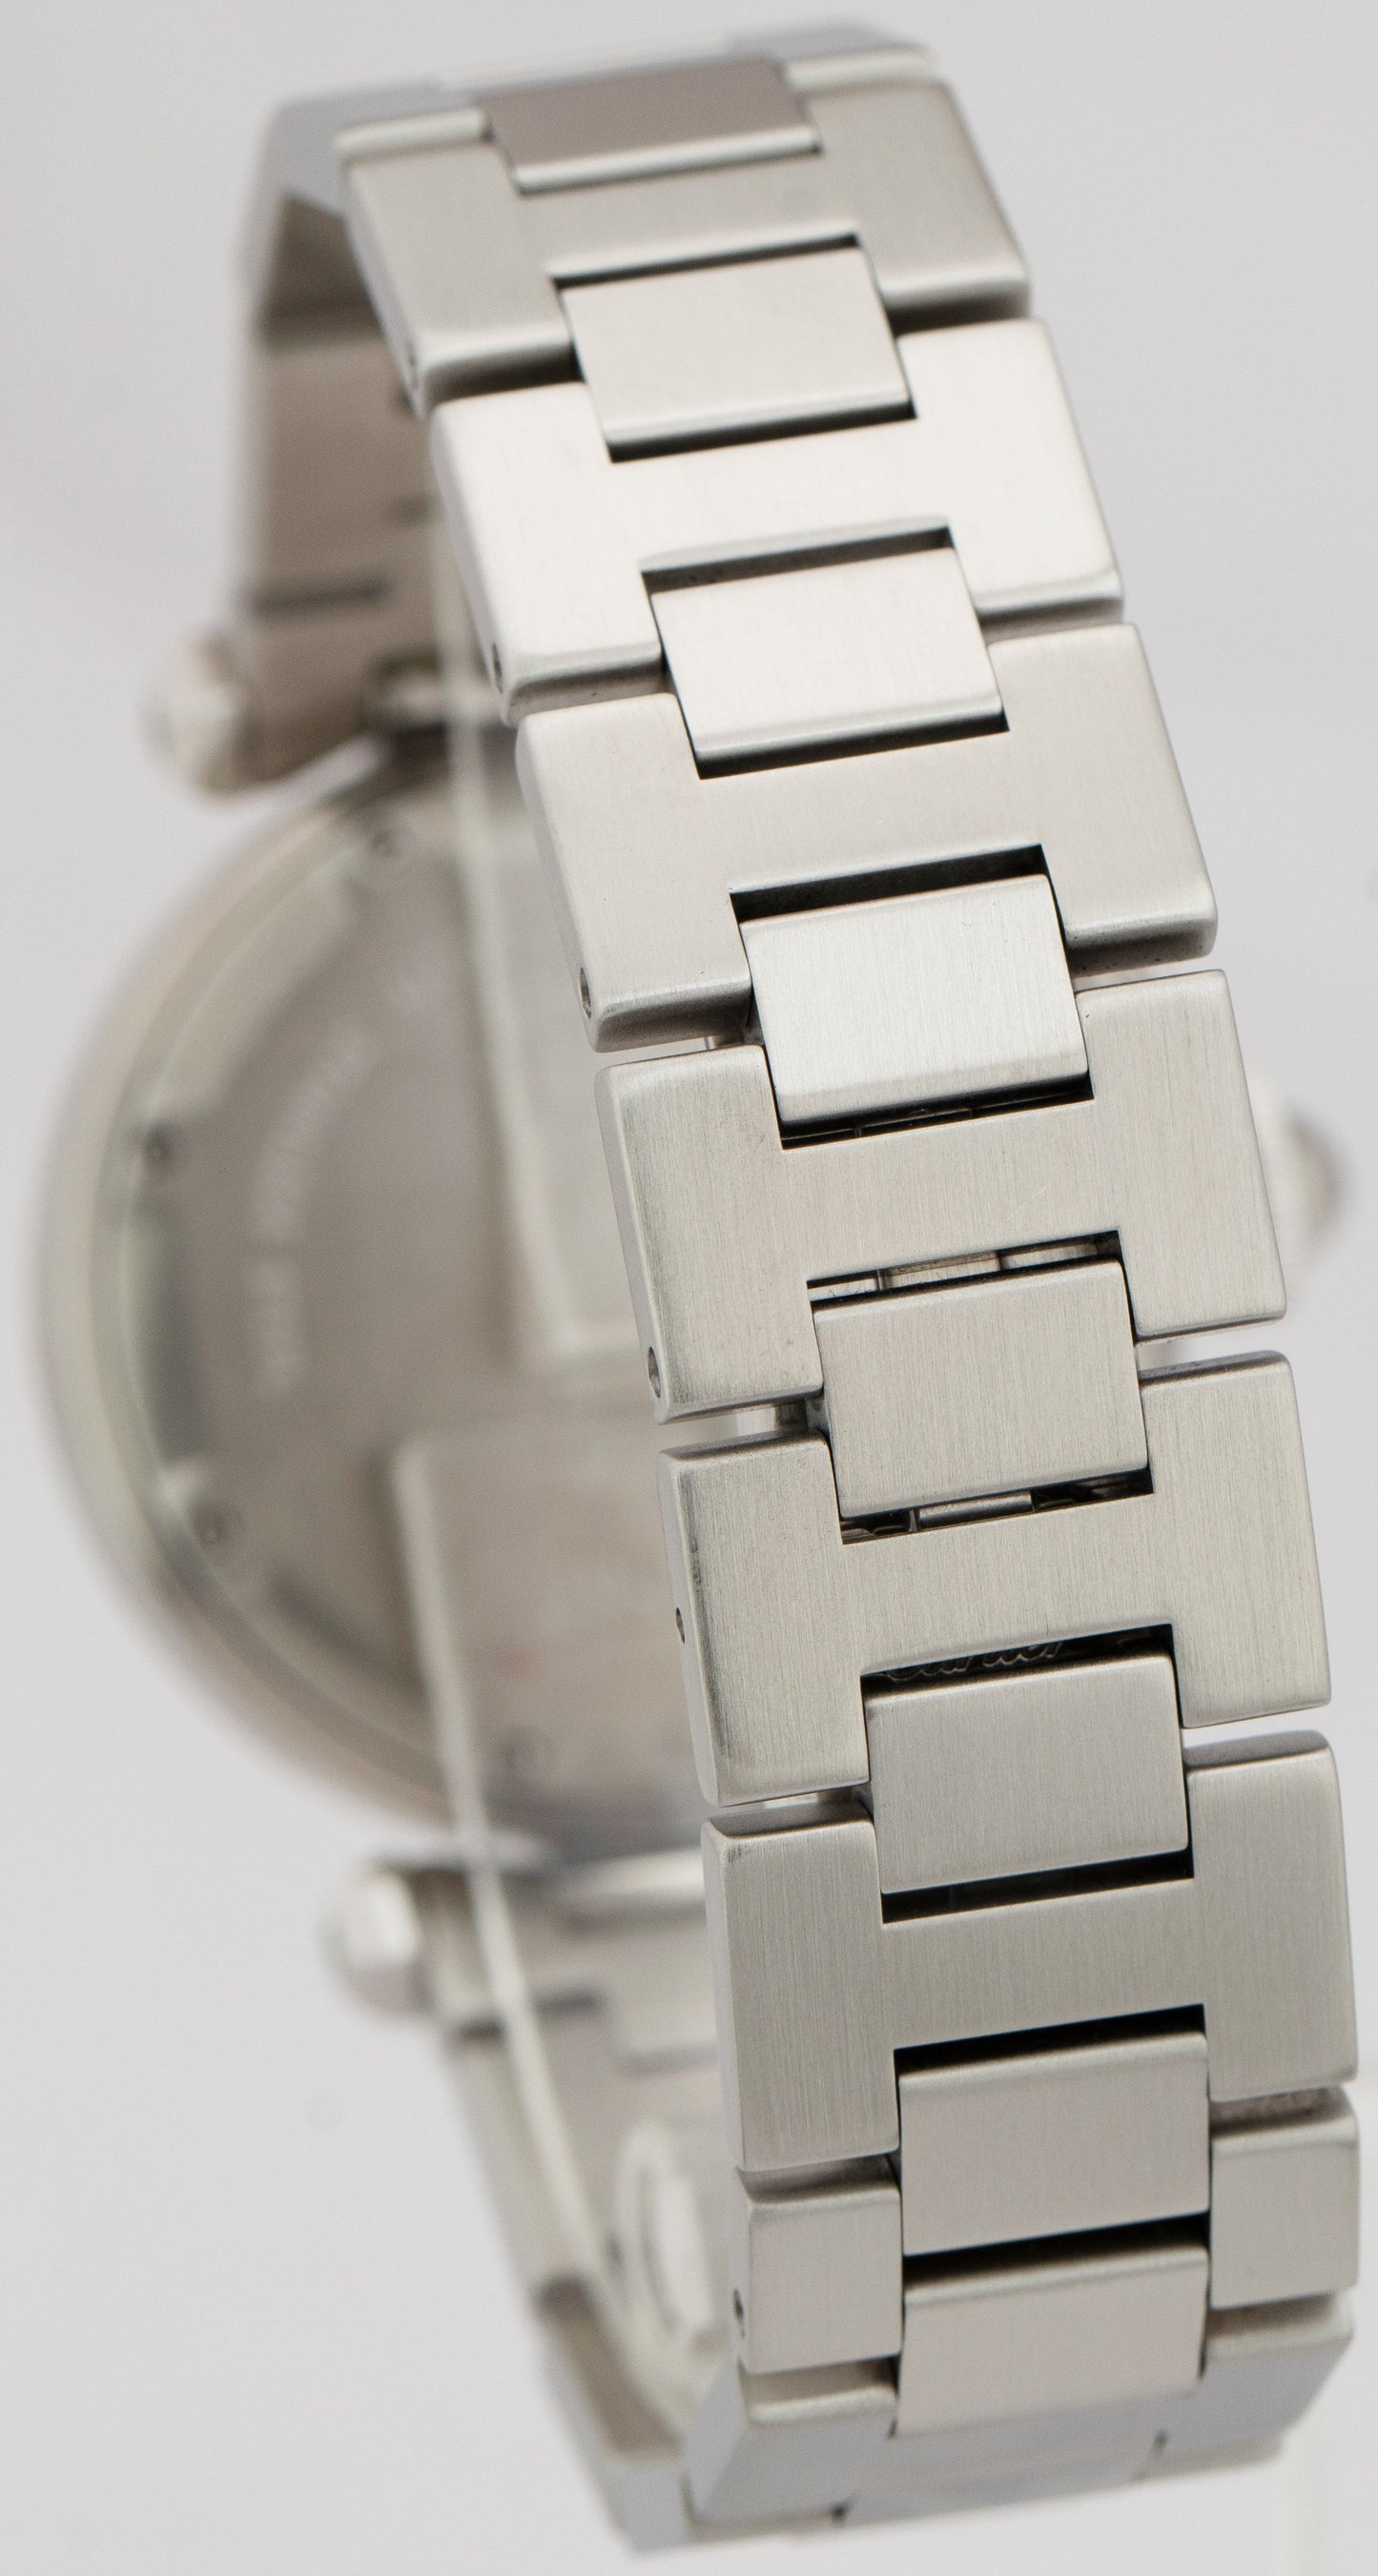 Cartier Pasha White Arabic 35mm Stainless Steel Automatic Date Watch 2475